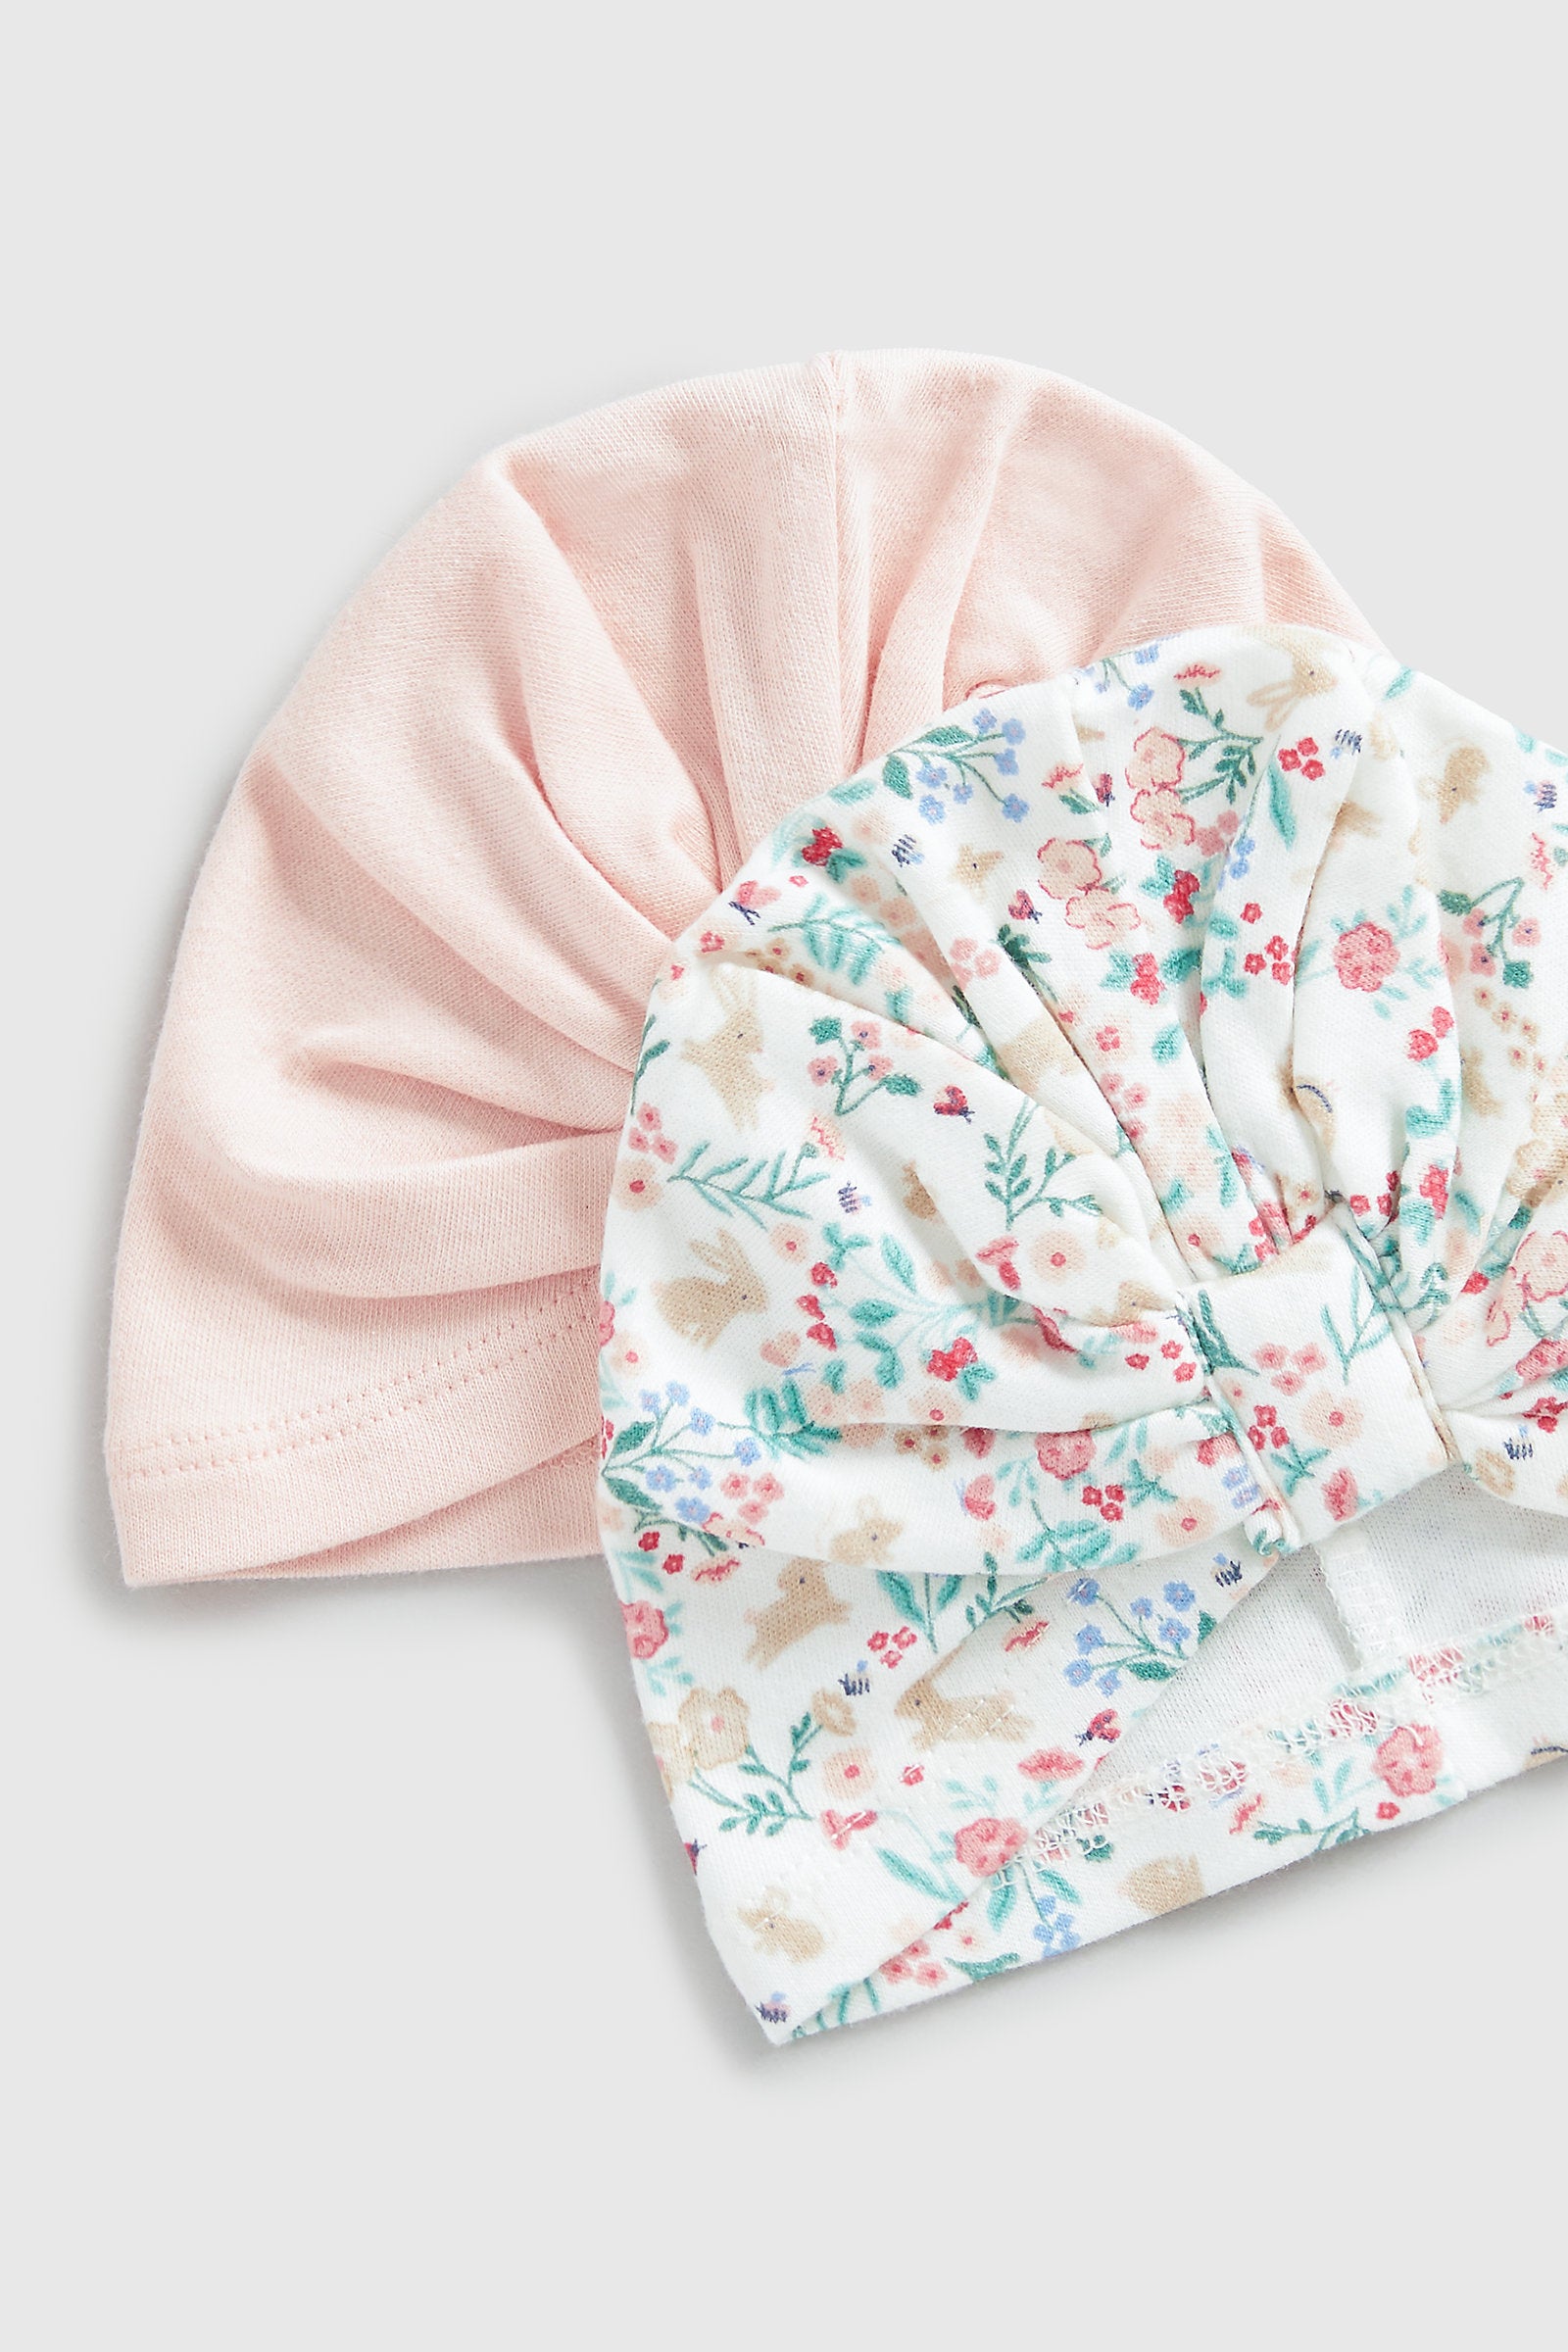 Mothercare In the Garden Baby Hats - 2 Pack